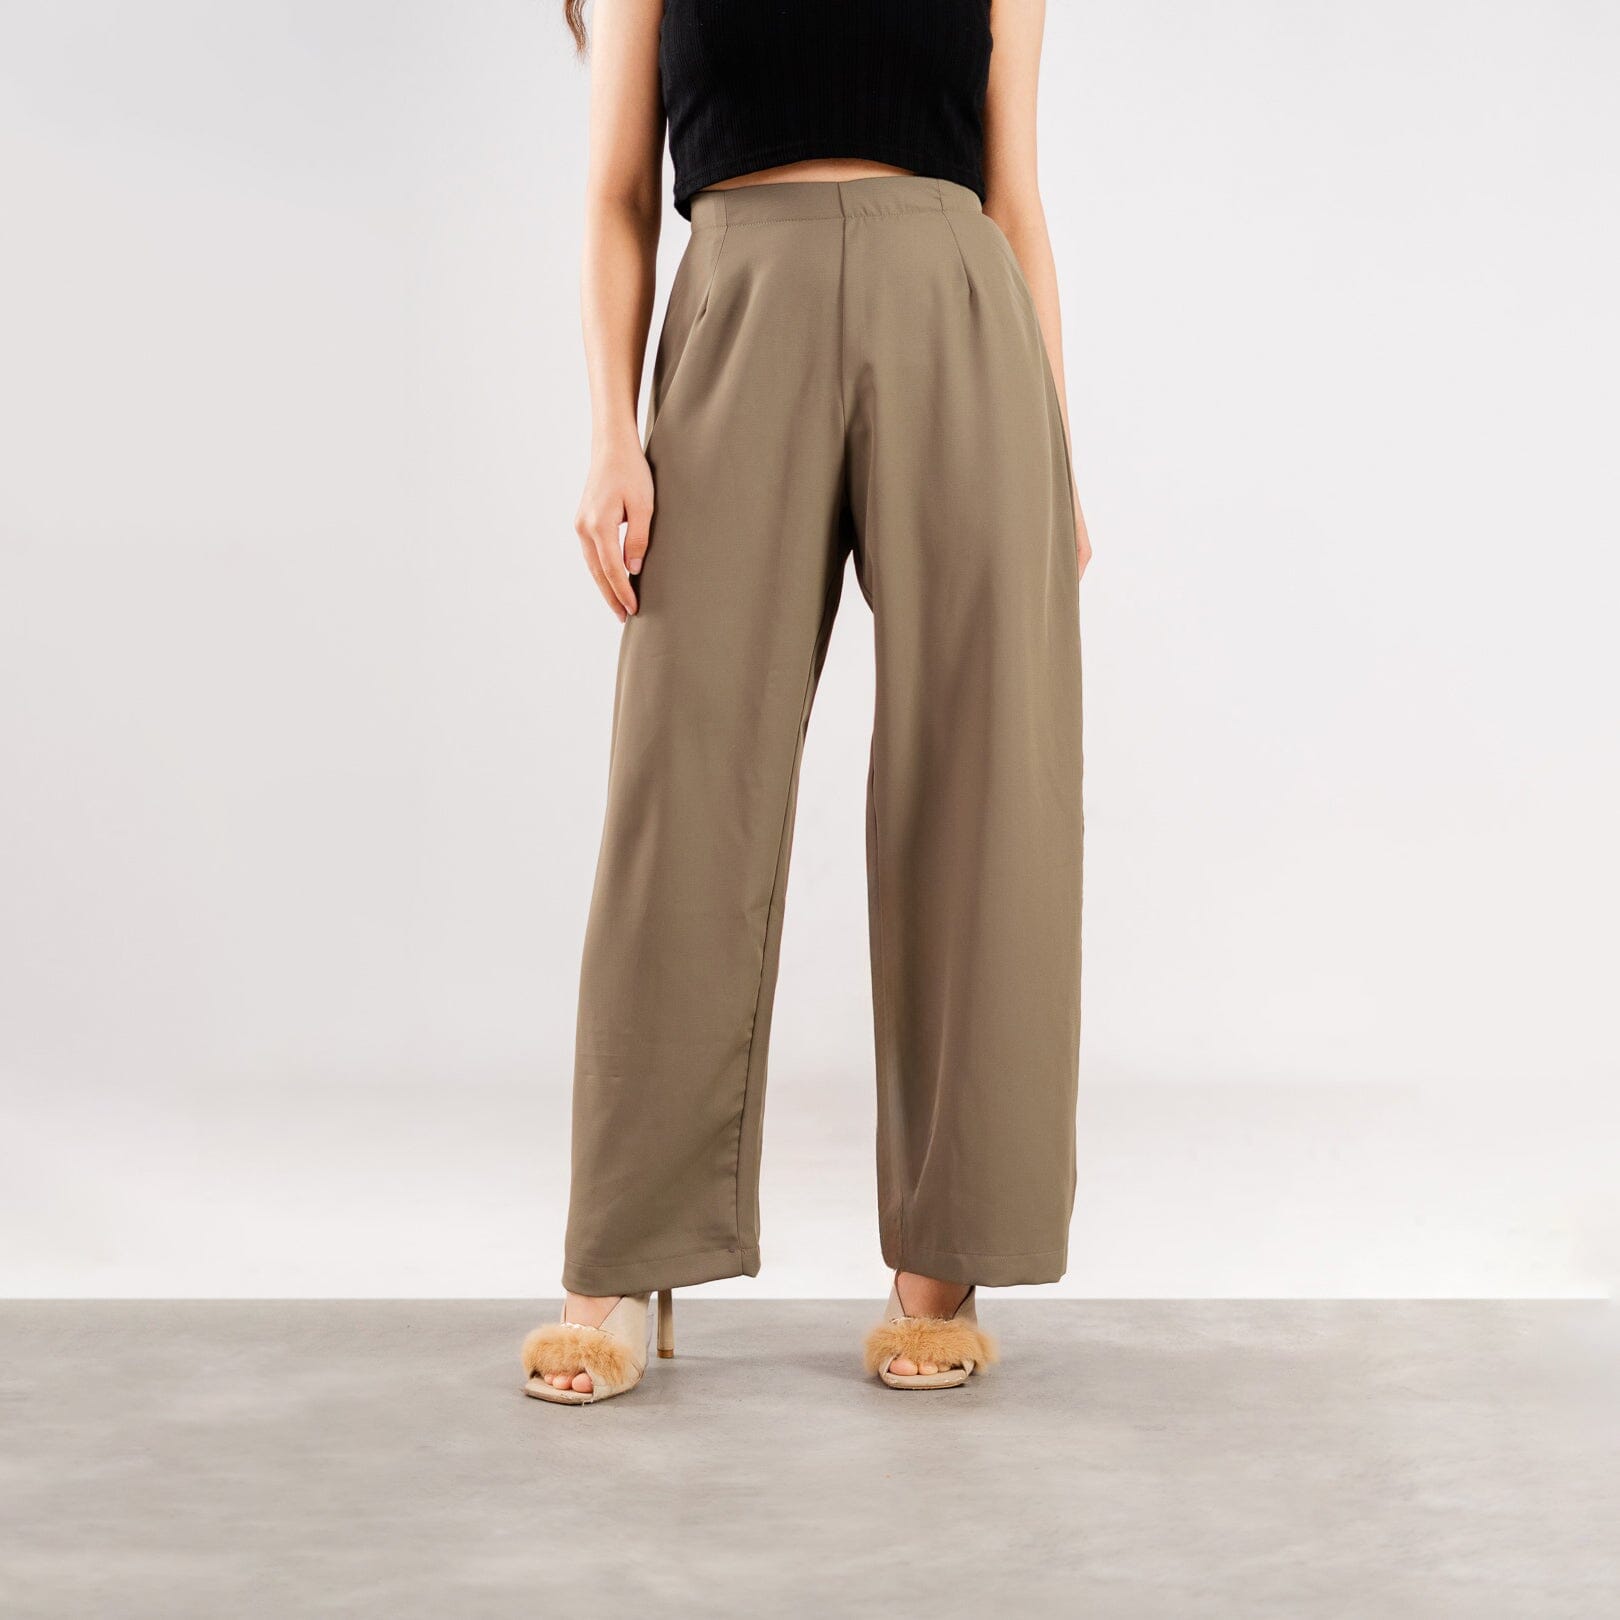 East West Women's Loose Straight Pants Women's Trousers East West Taupe XS 